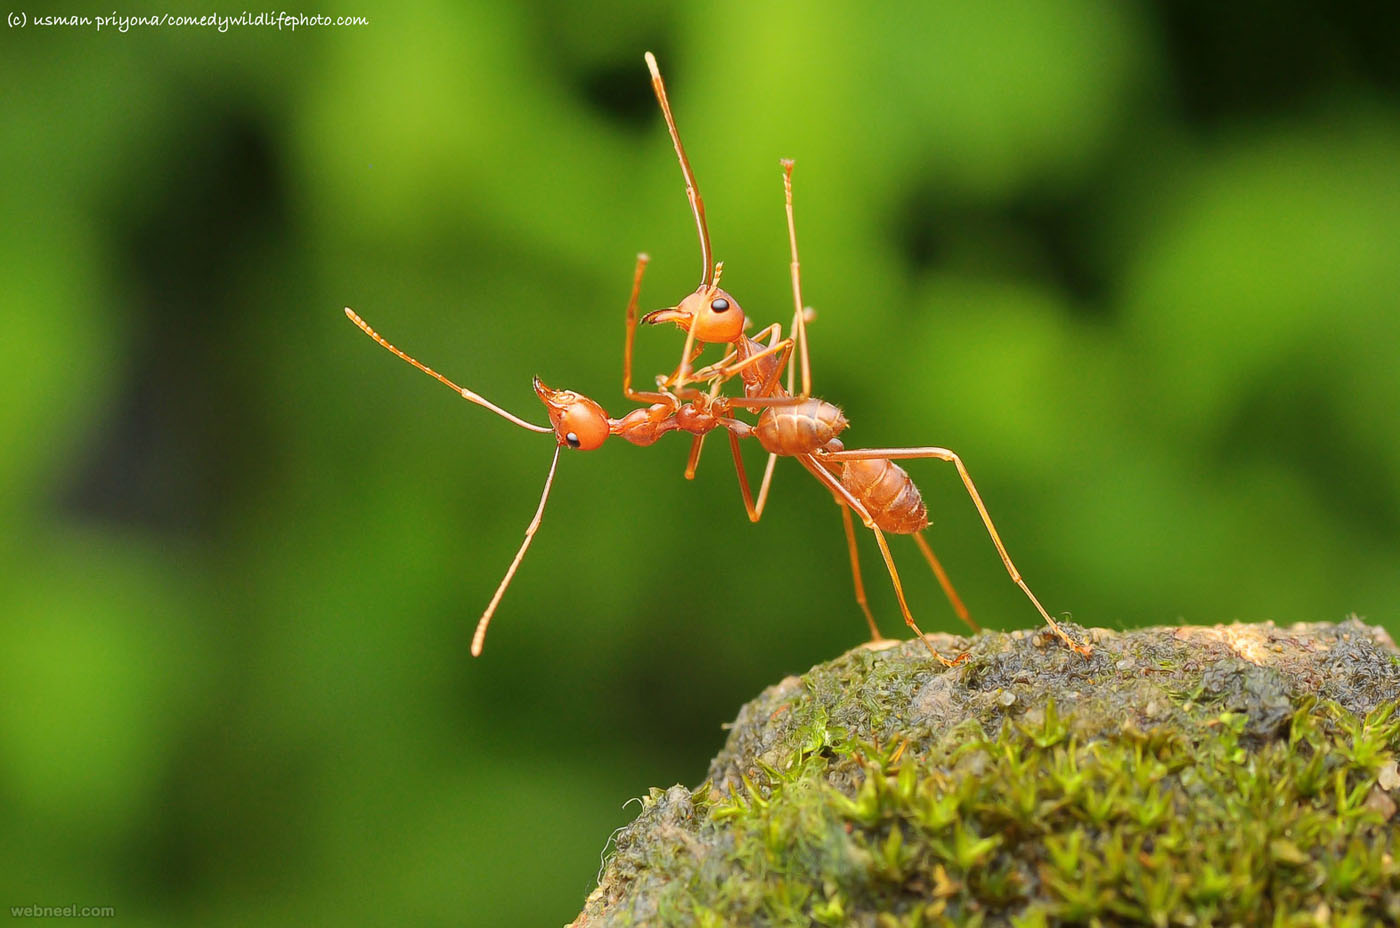 ant suicide comedy wildlife photography